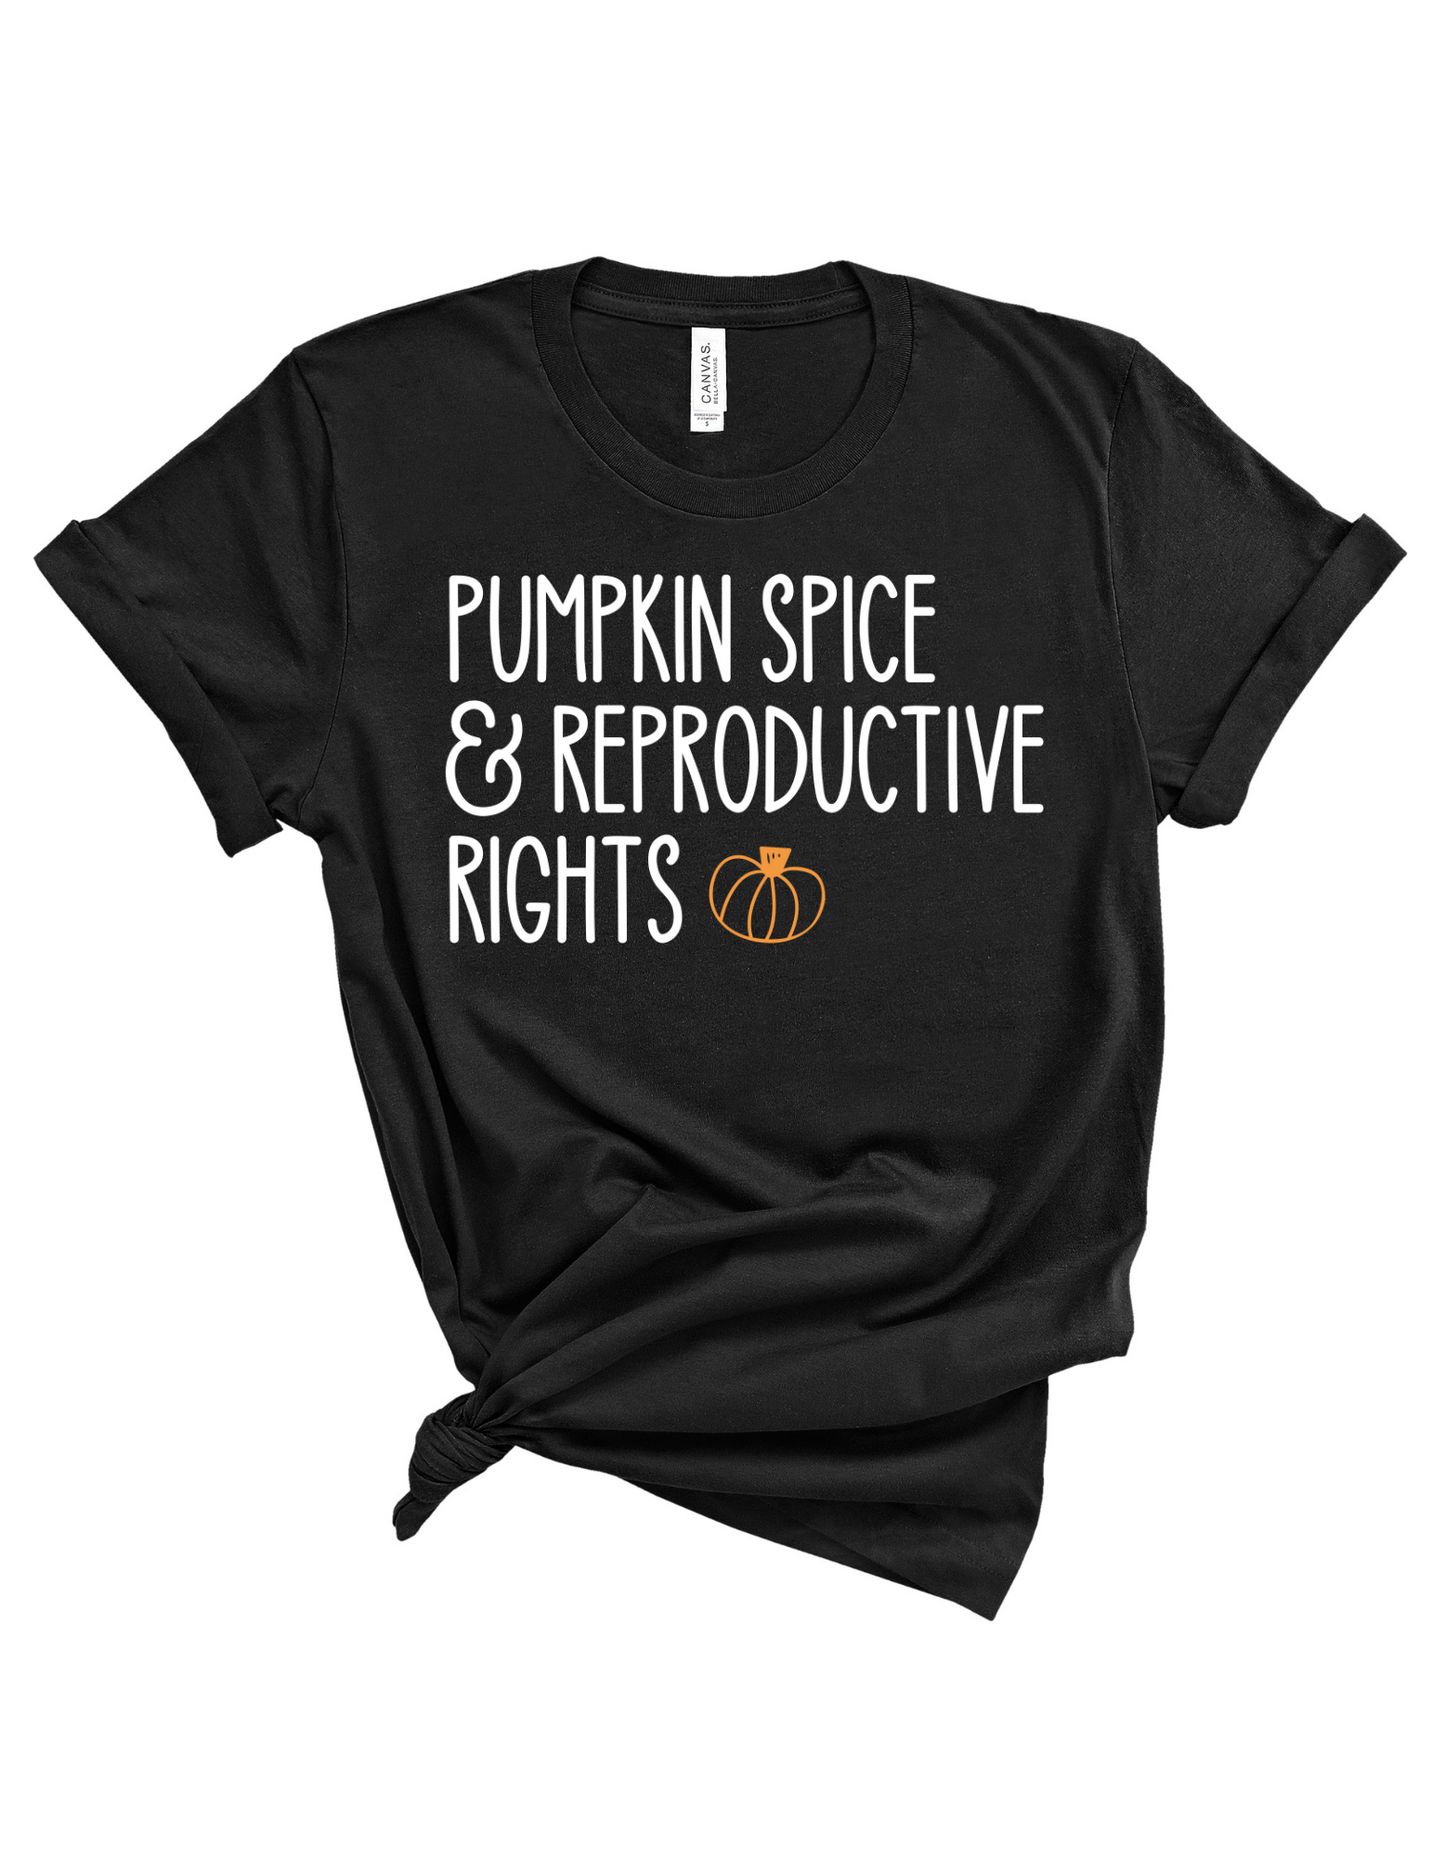 Pumpkin Spice & Reproductive Rights Tee